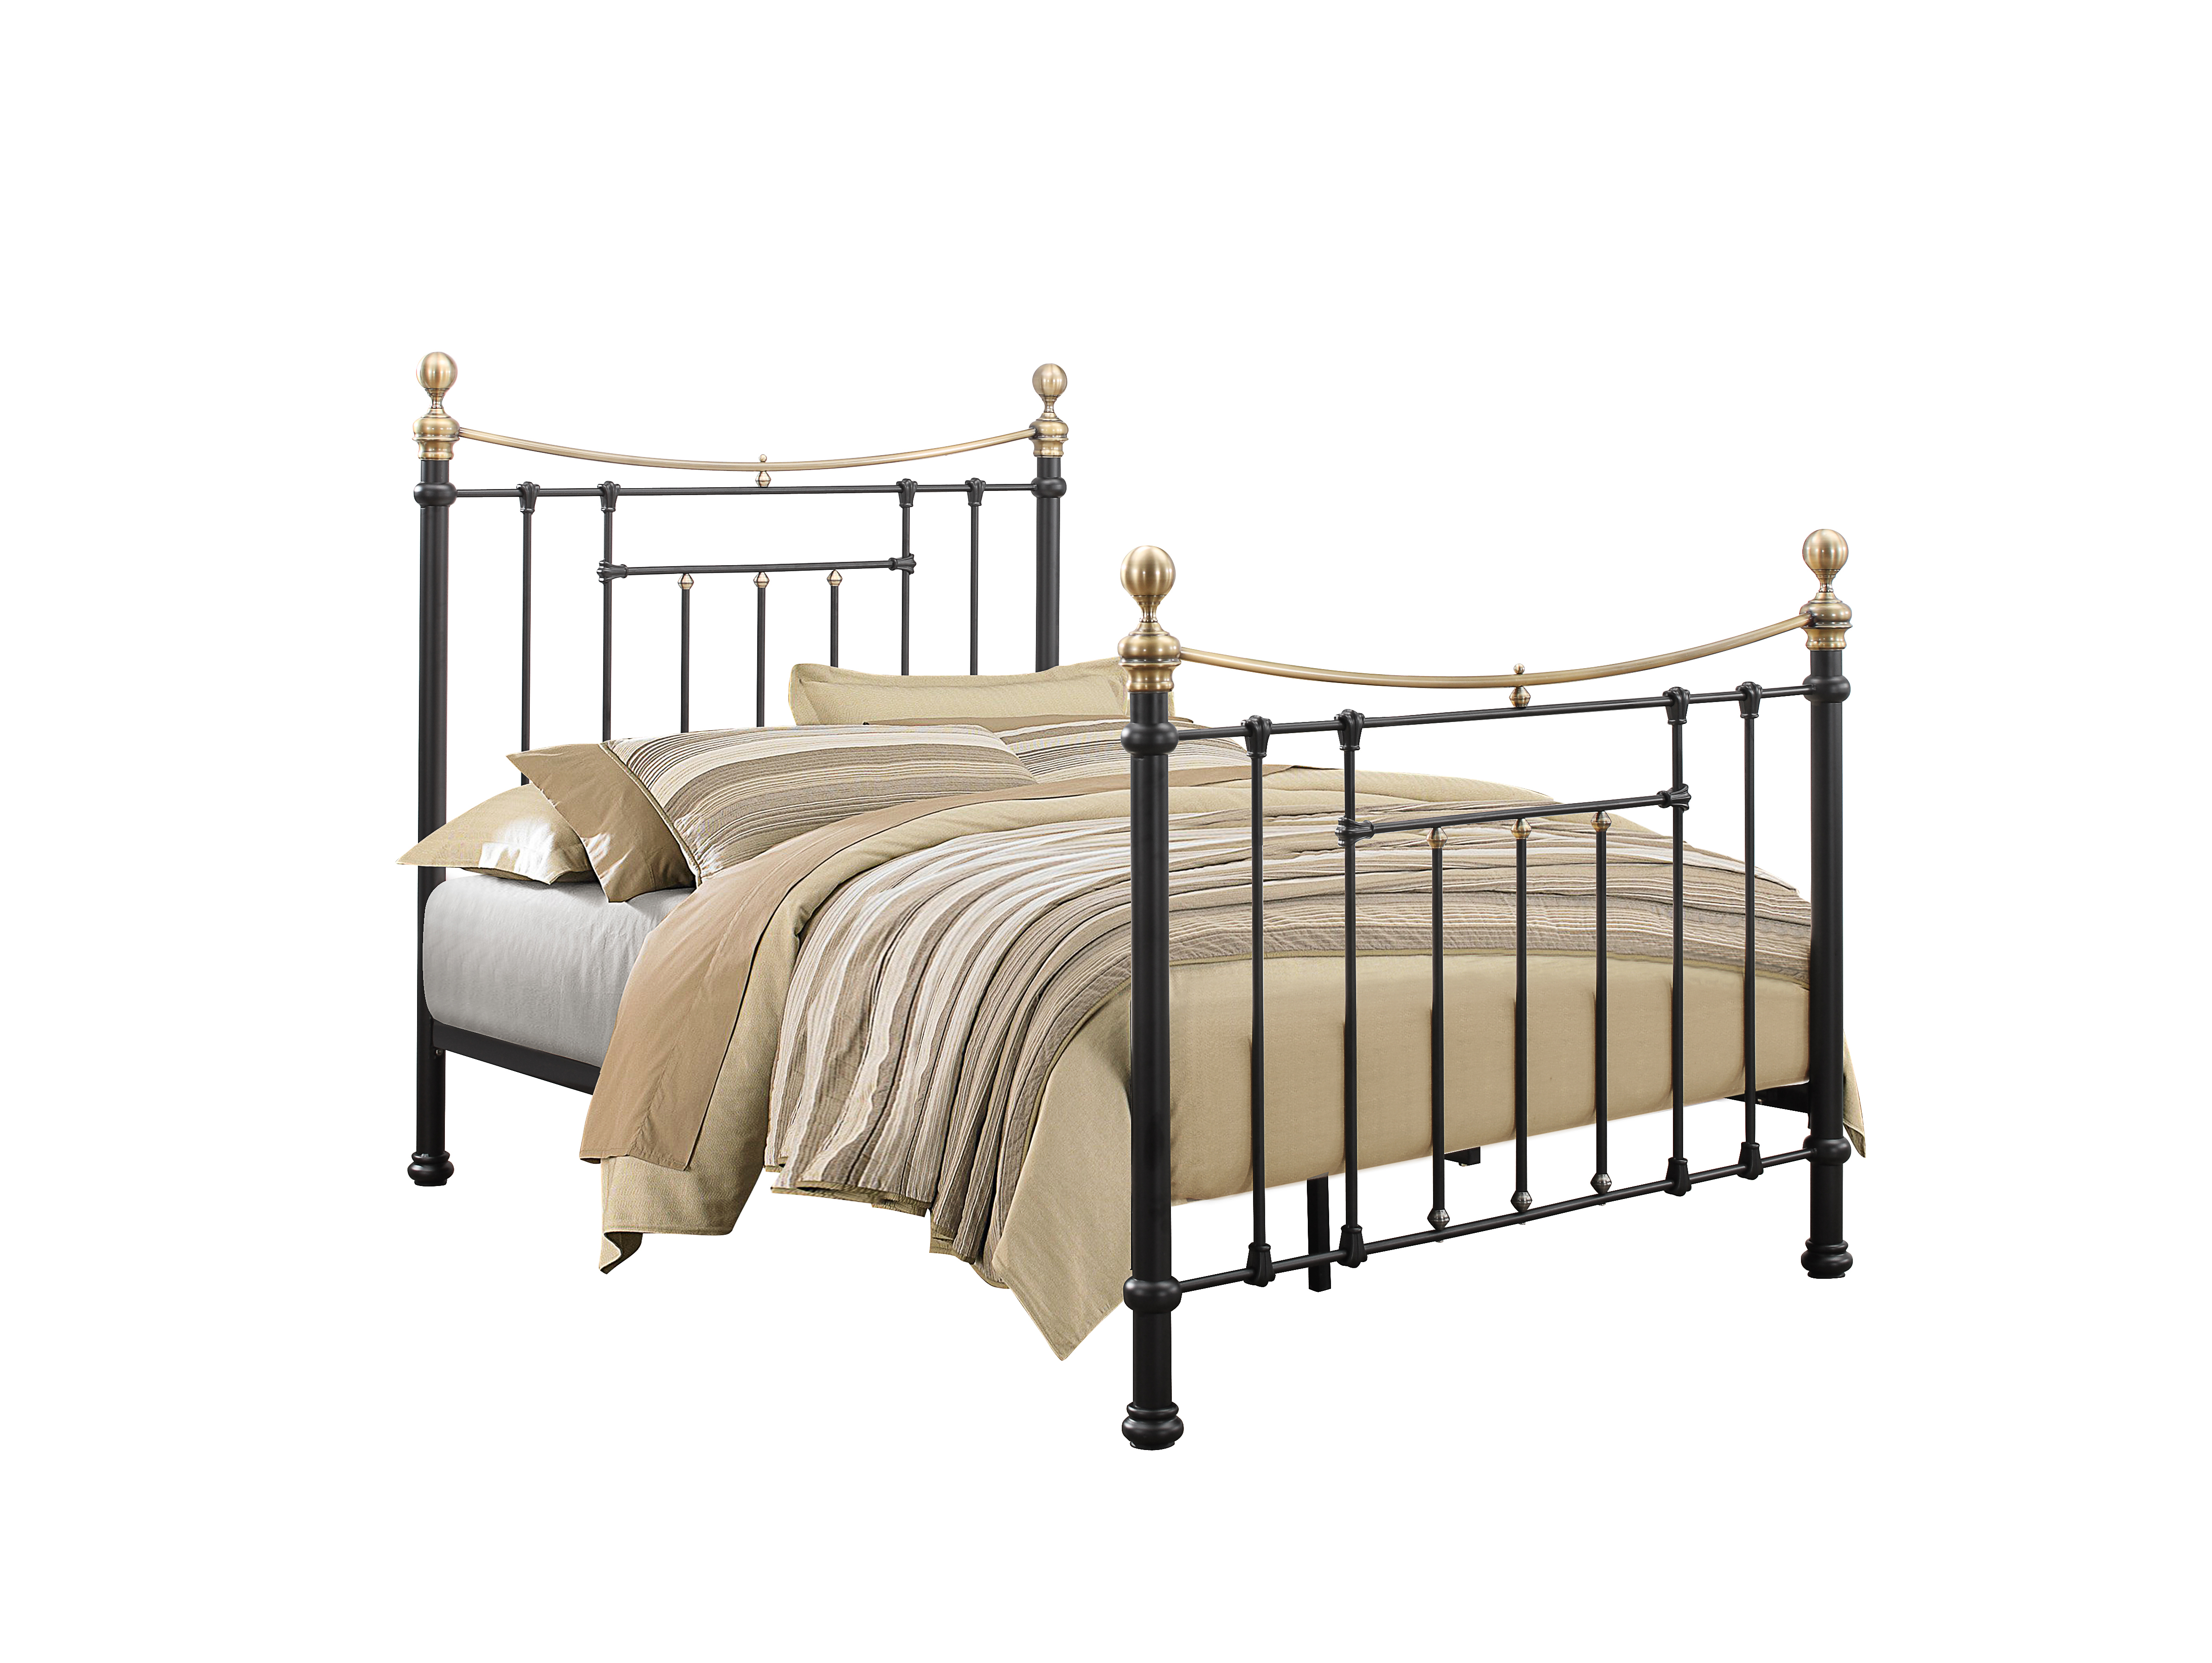 Bronte Bed Frame Assembly Instructions (Birlea)